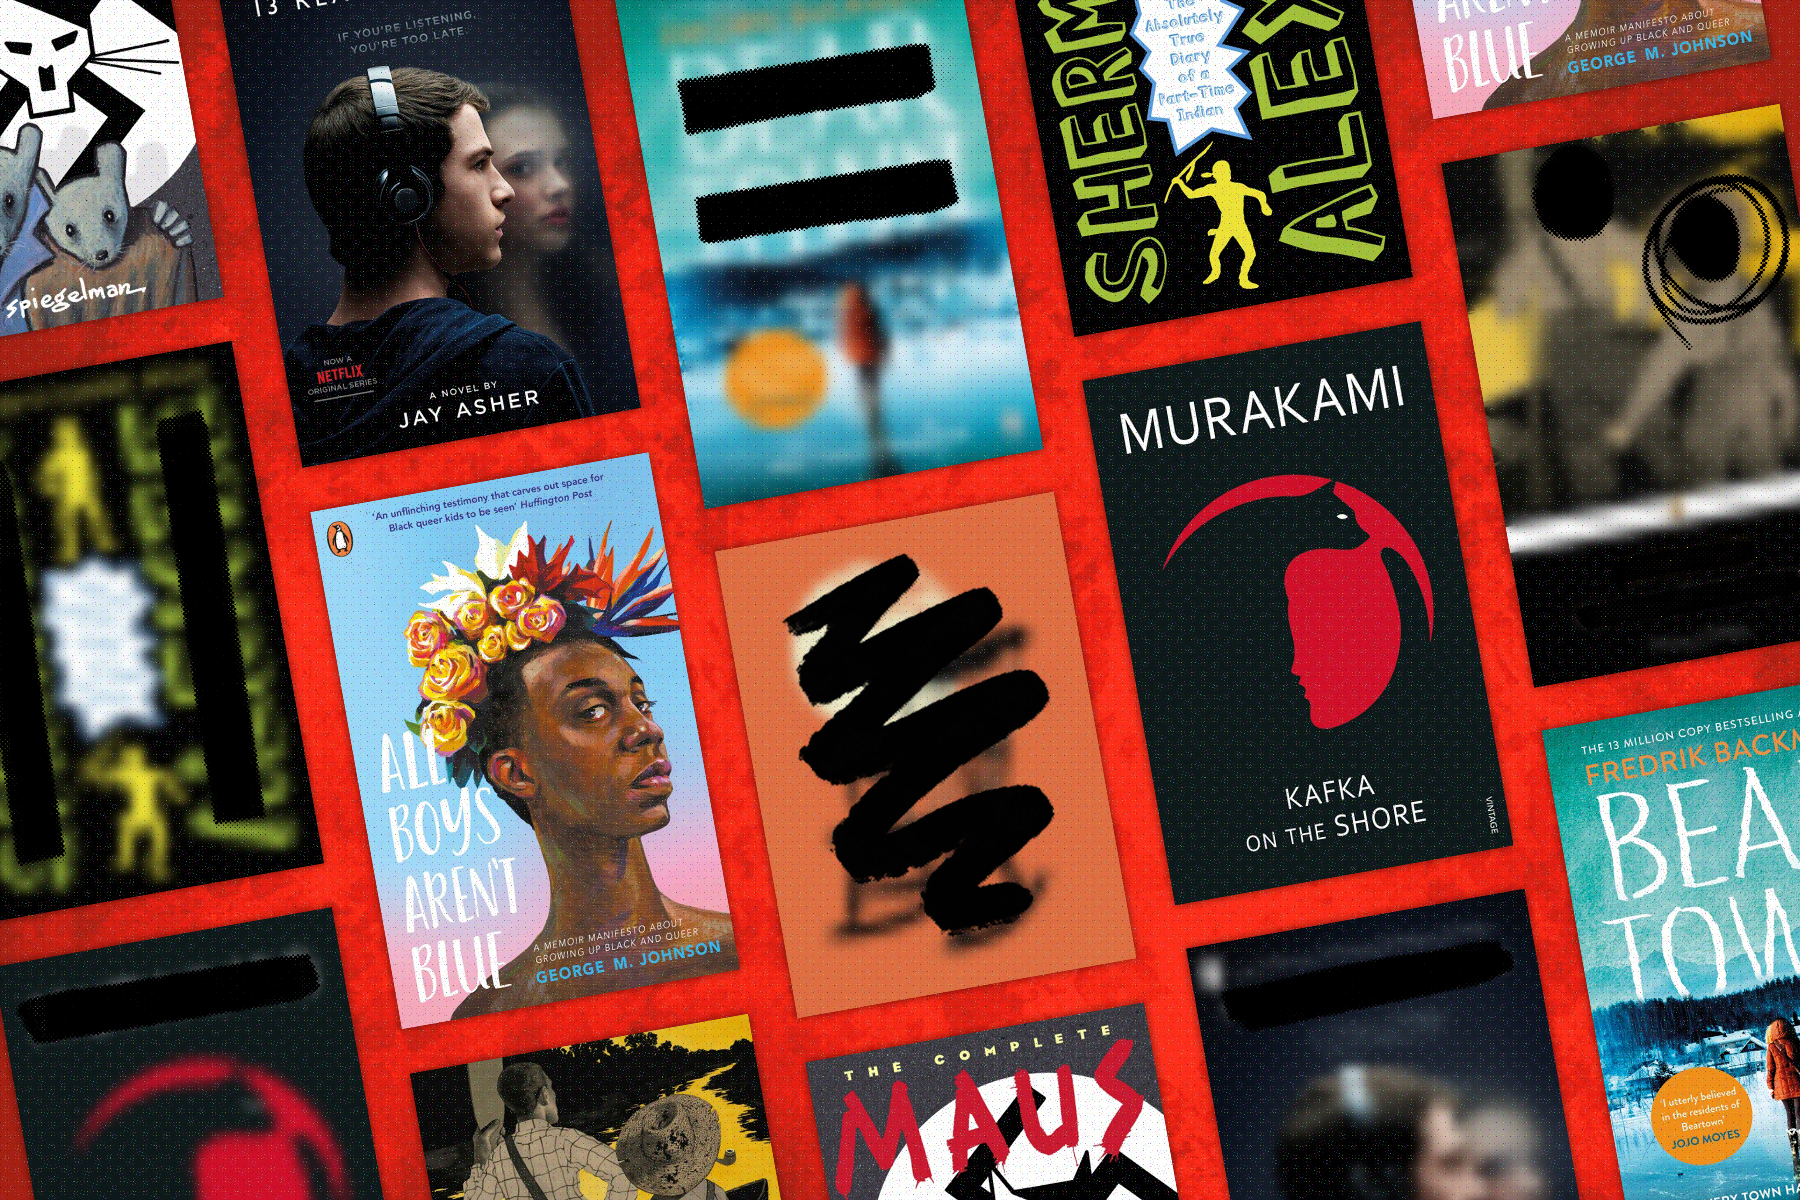 A flatlay image of covers of banned books against a red background – some are blurred out or otherwise visually censored